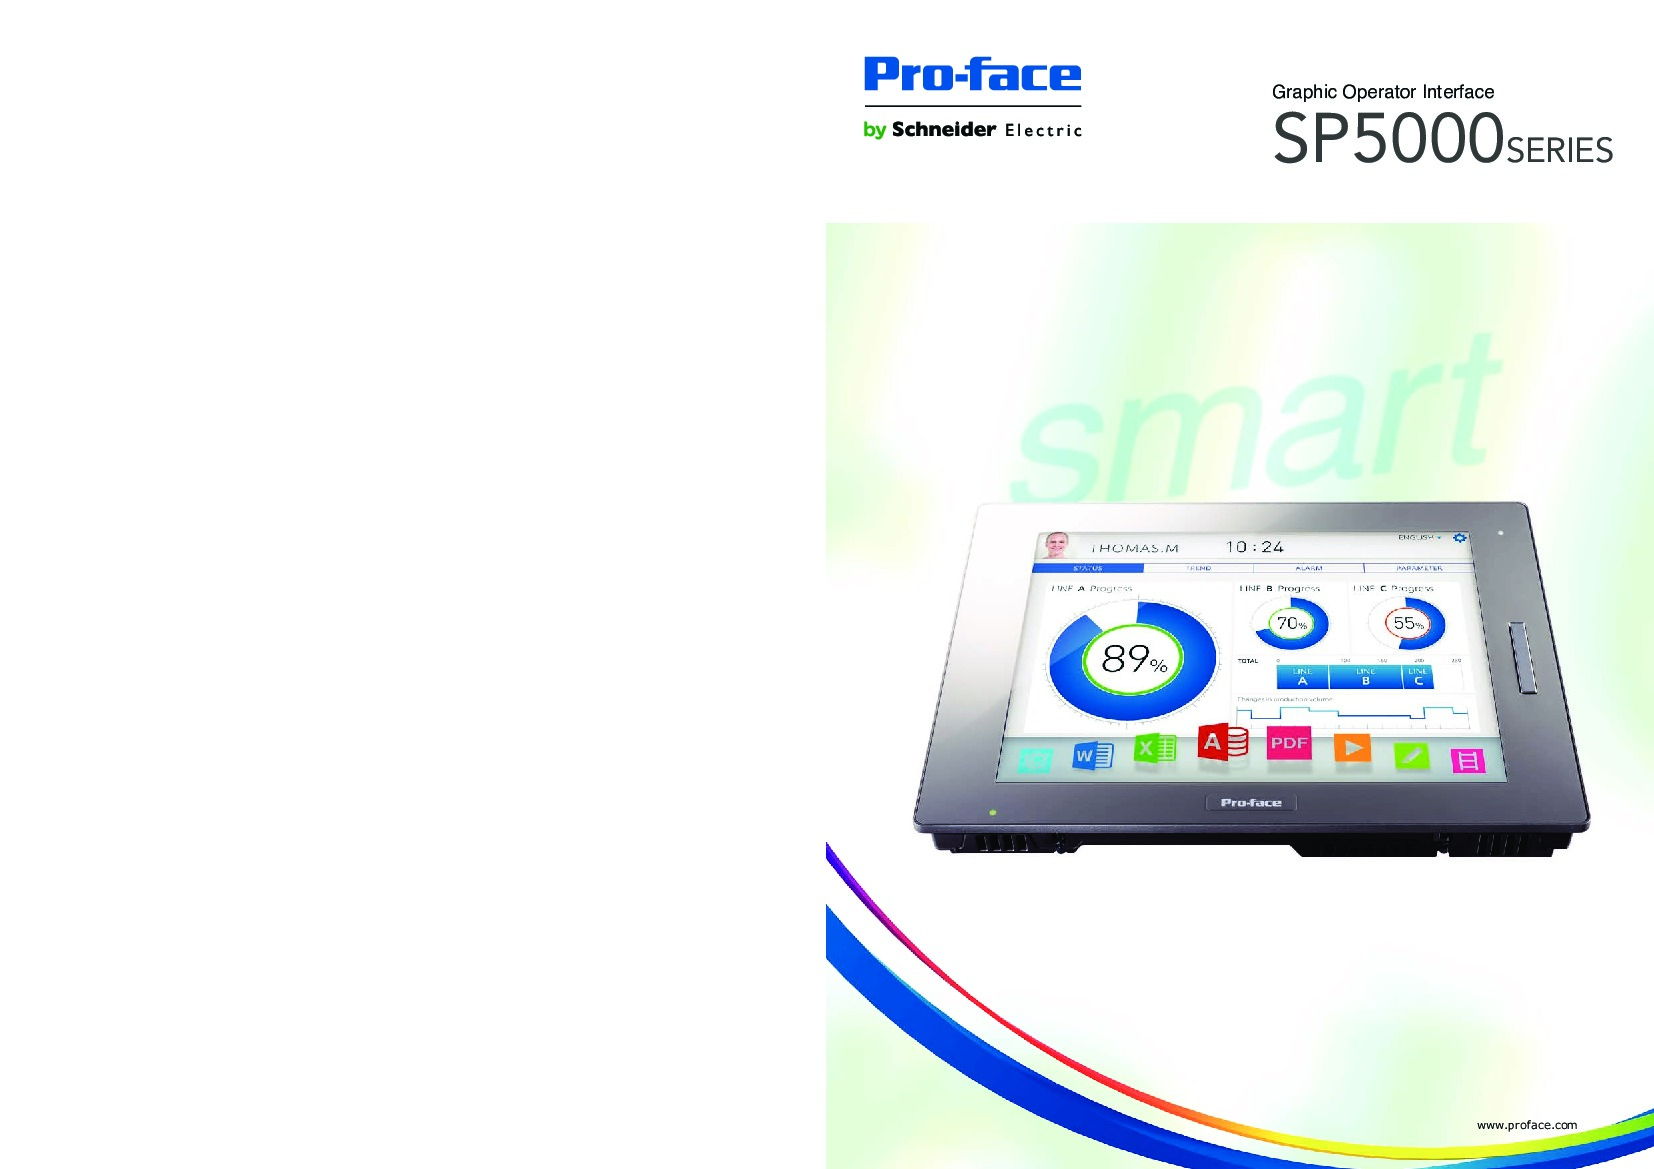 First Page Image of PFXSP5B10 Pro-face SP5000 Catalog.pdf